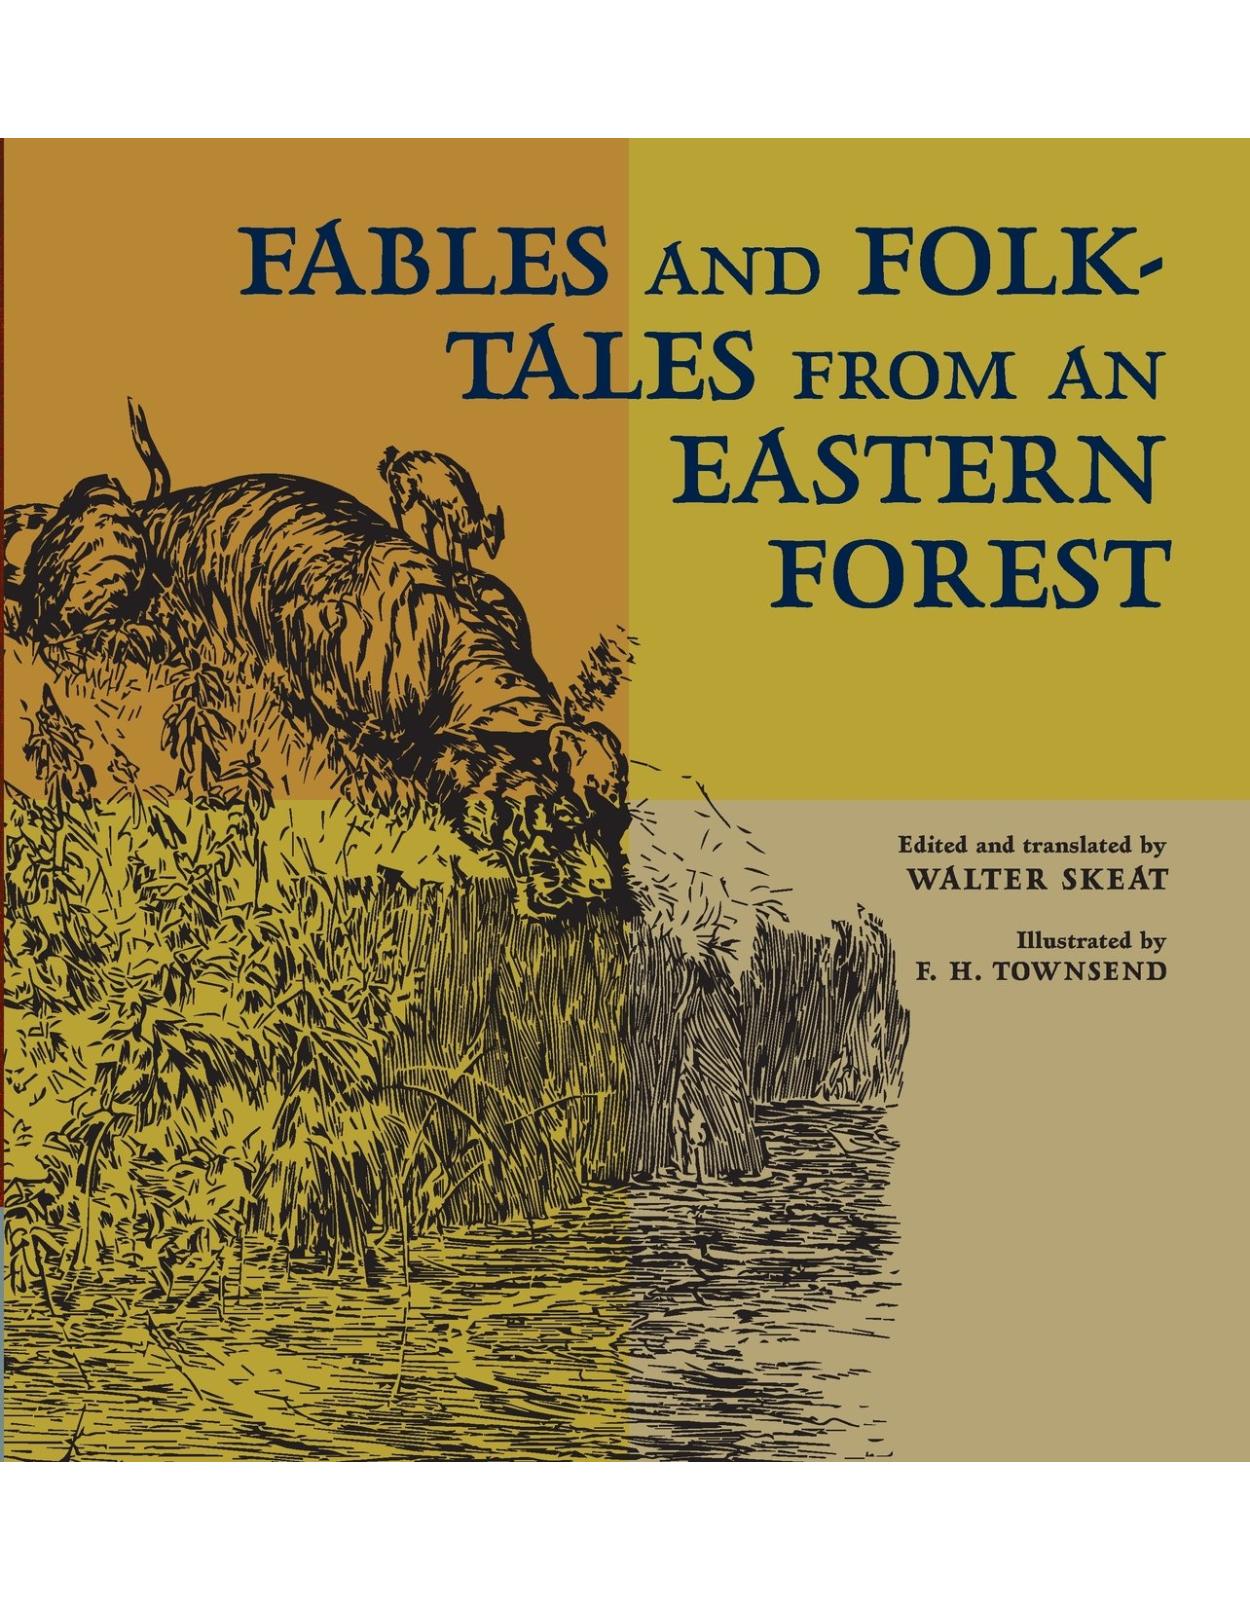 Fables and Folk-Tales from an Eastern Forest